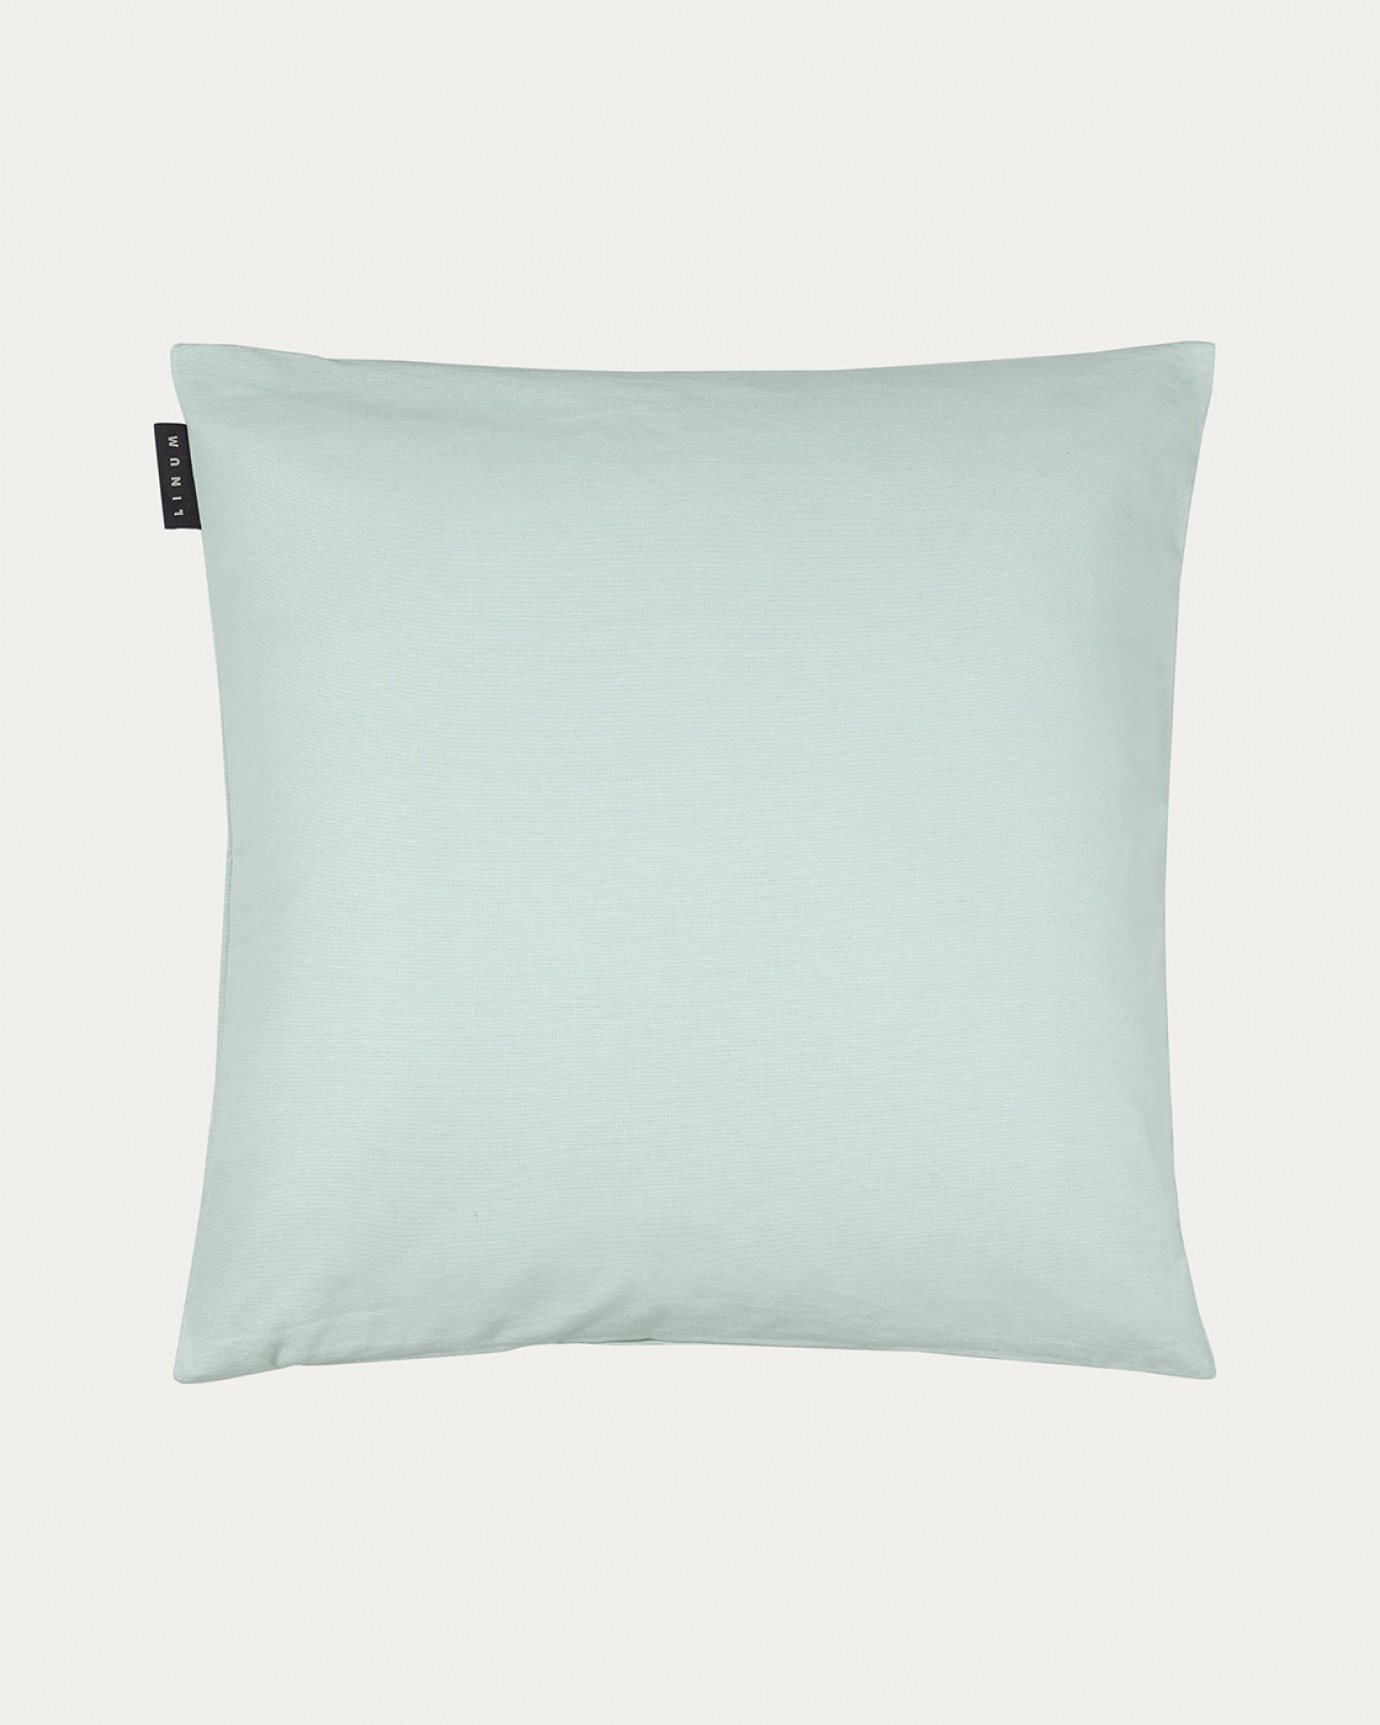 Product image light ice green ANNABELL cushion cover made of soft cotton from LINUM DESIGN. Size 50x50 cm.